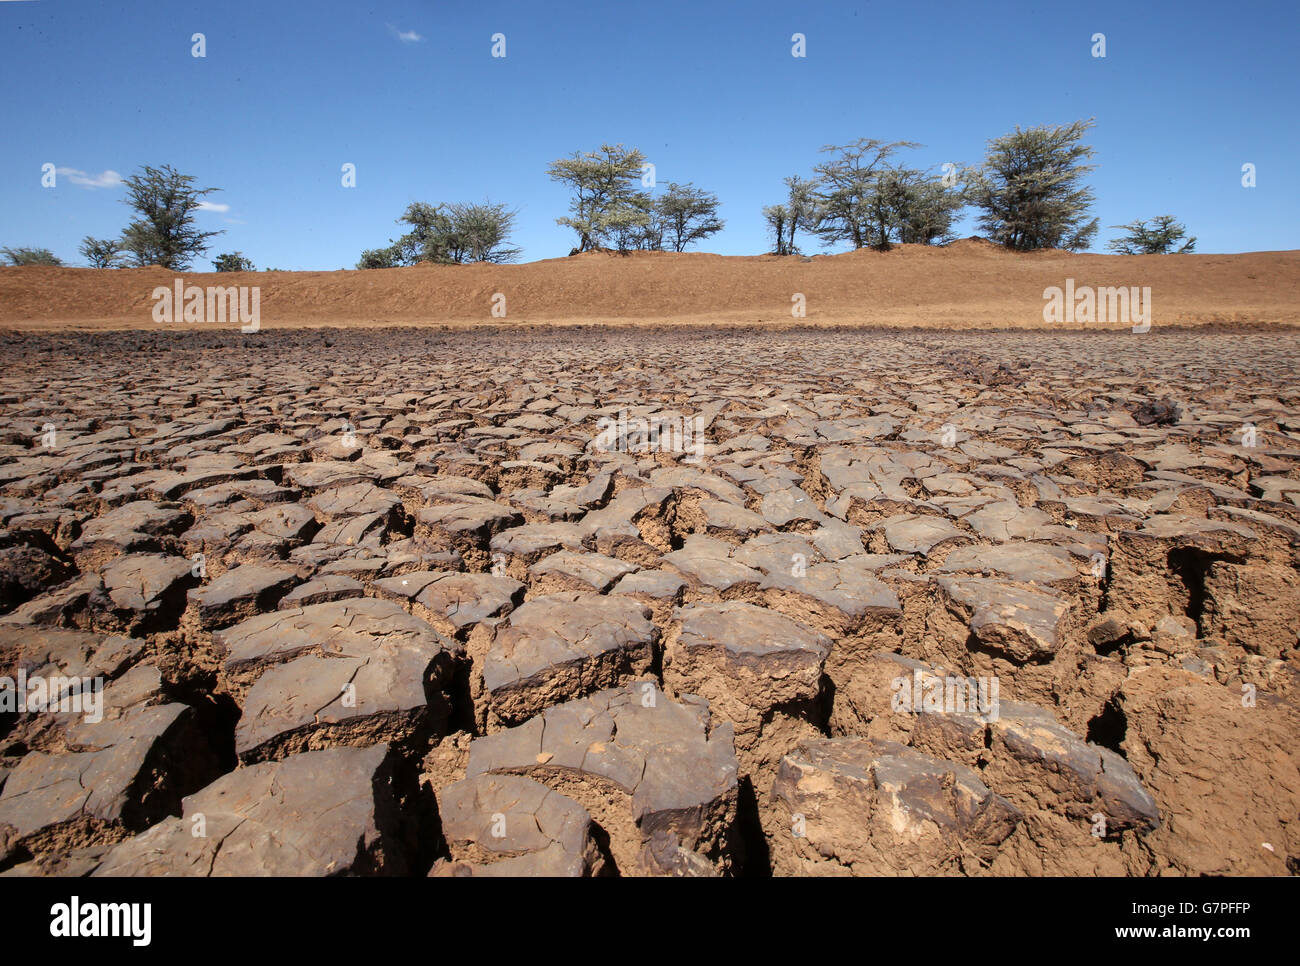 Dried land at Laikipa County as Kenyans go about their daily life near the town of Nanukye. Stock Photo